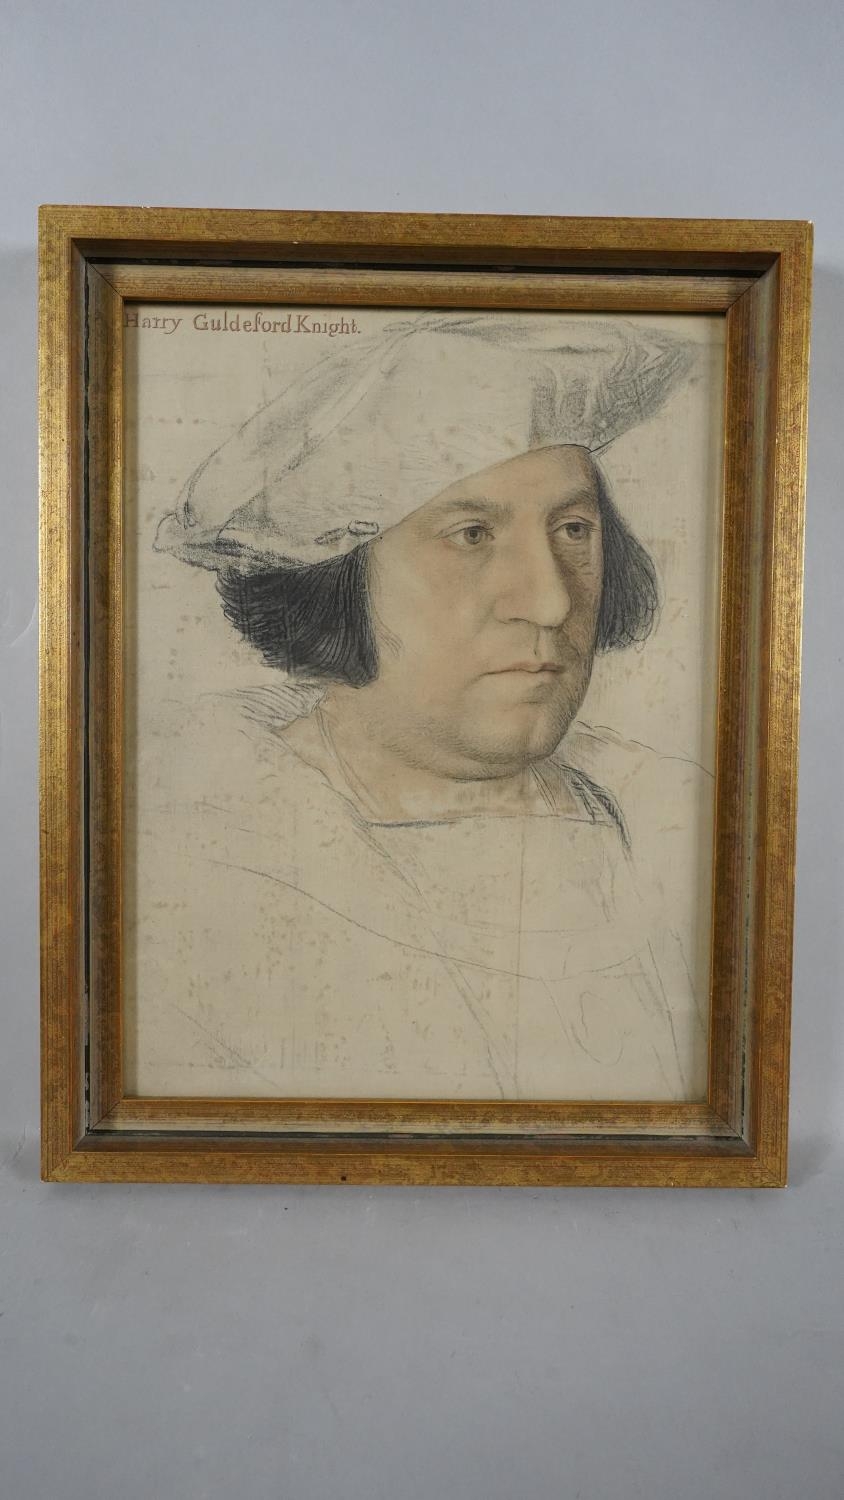 Two framed and glazed prints of drawings. One by Holbein the Younger of Henry Guildford Knight and - Image 6 of 9